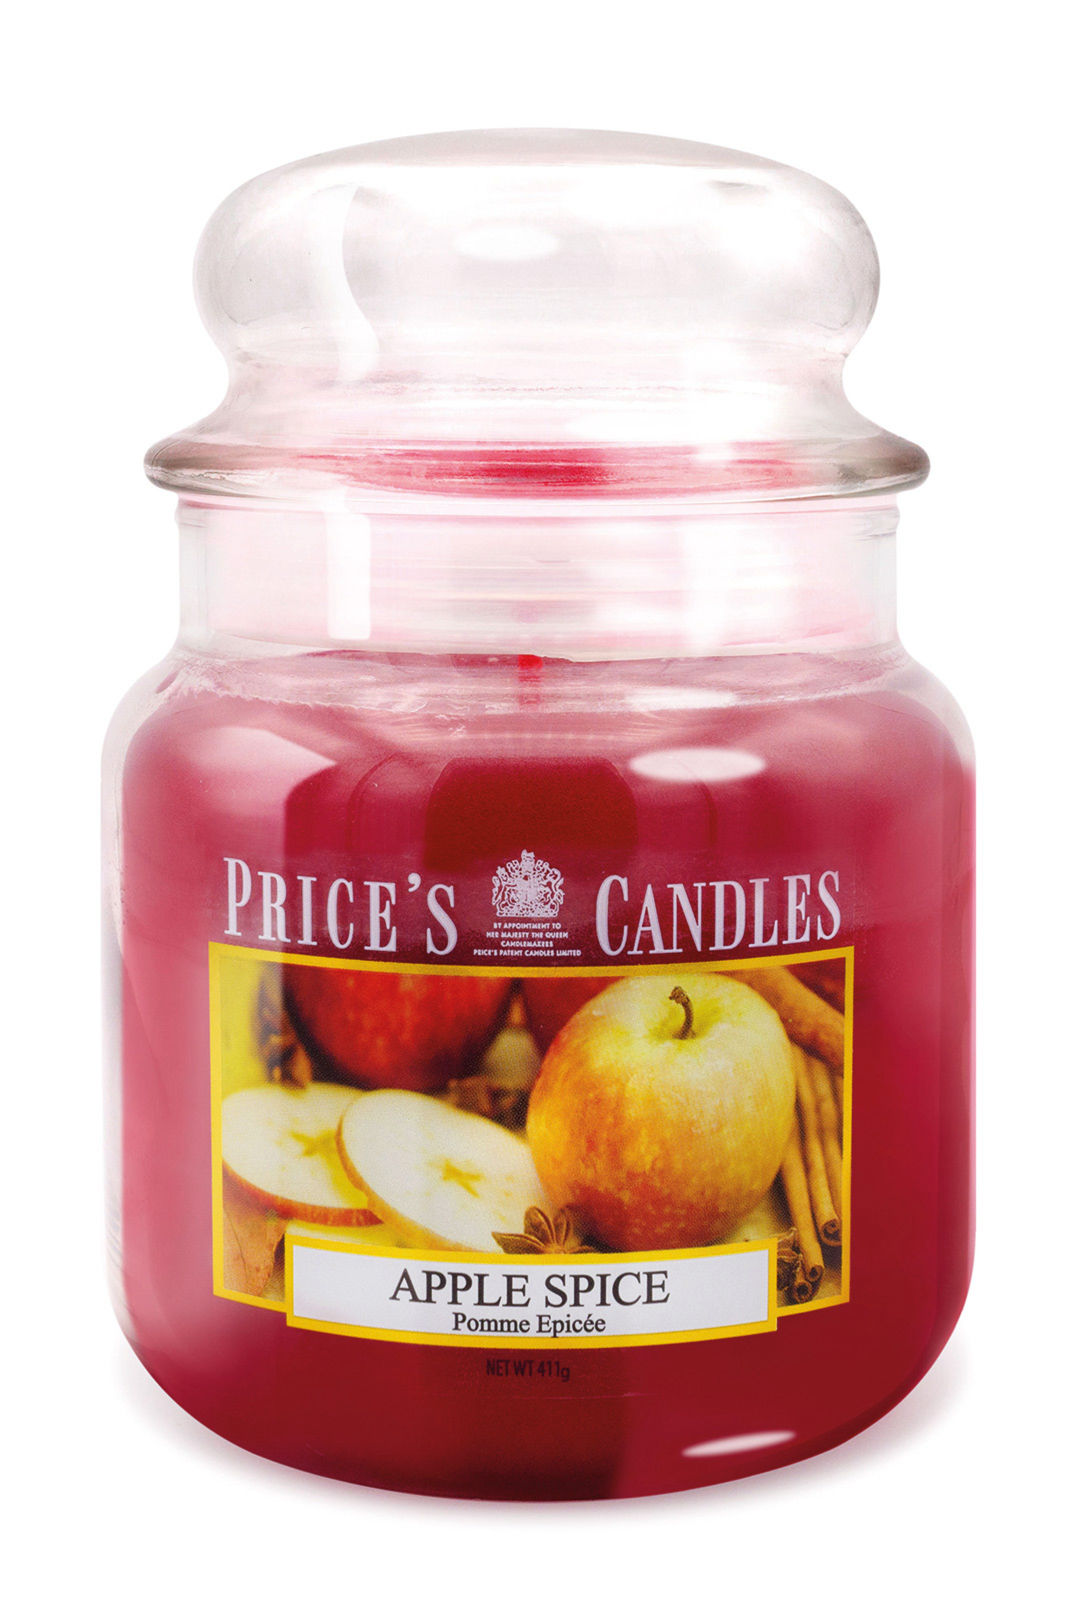 Prices Candle "Apple Spice" 411g